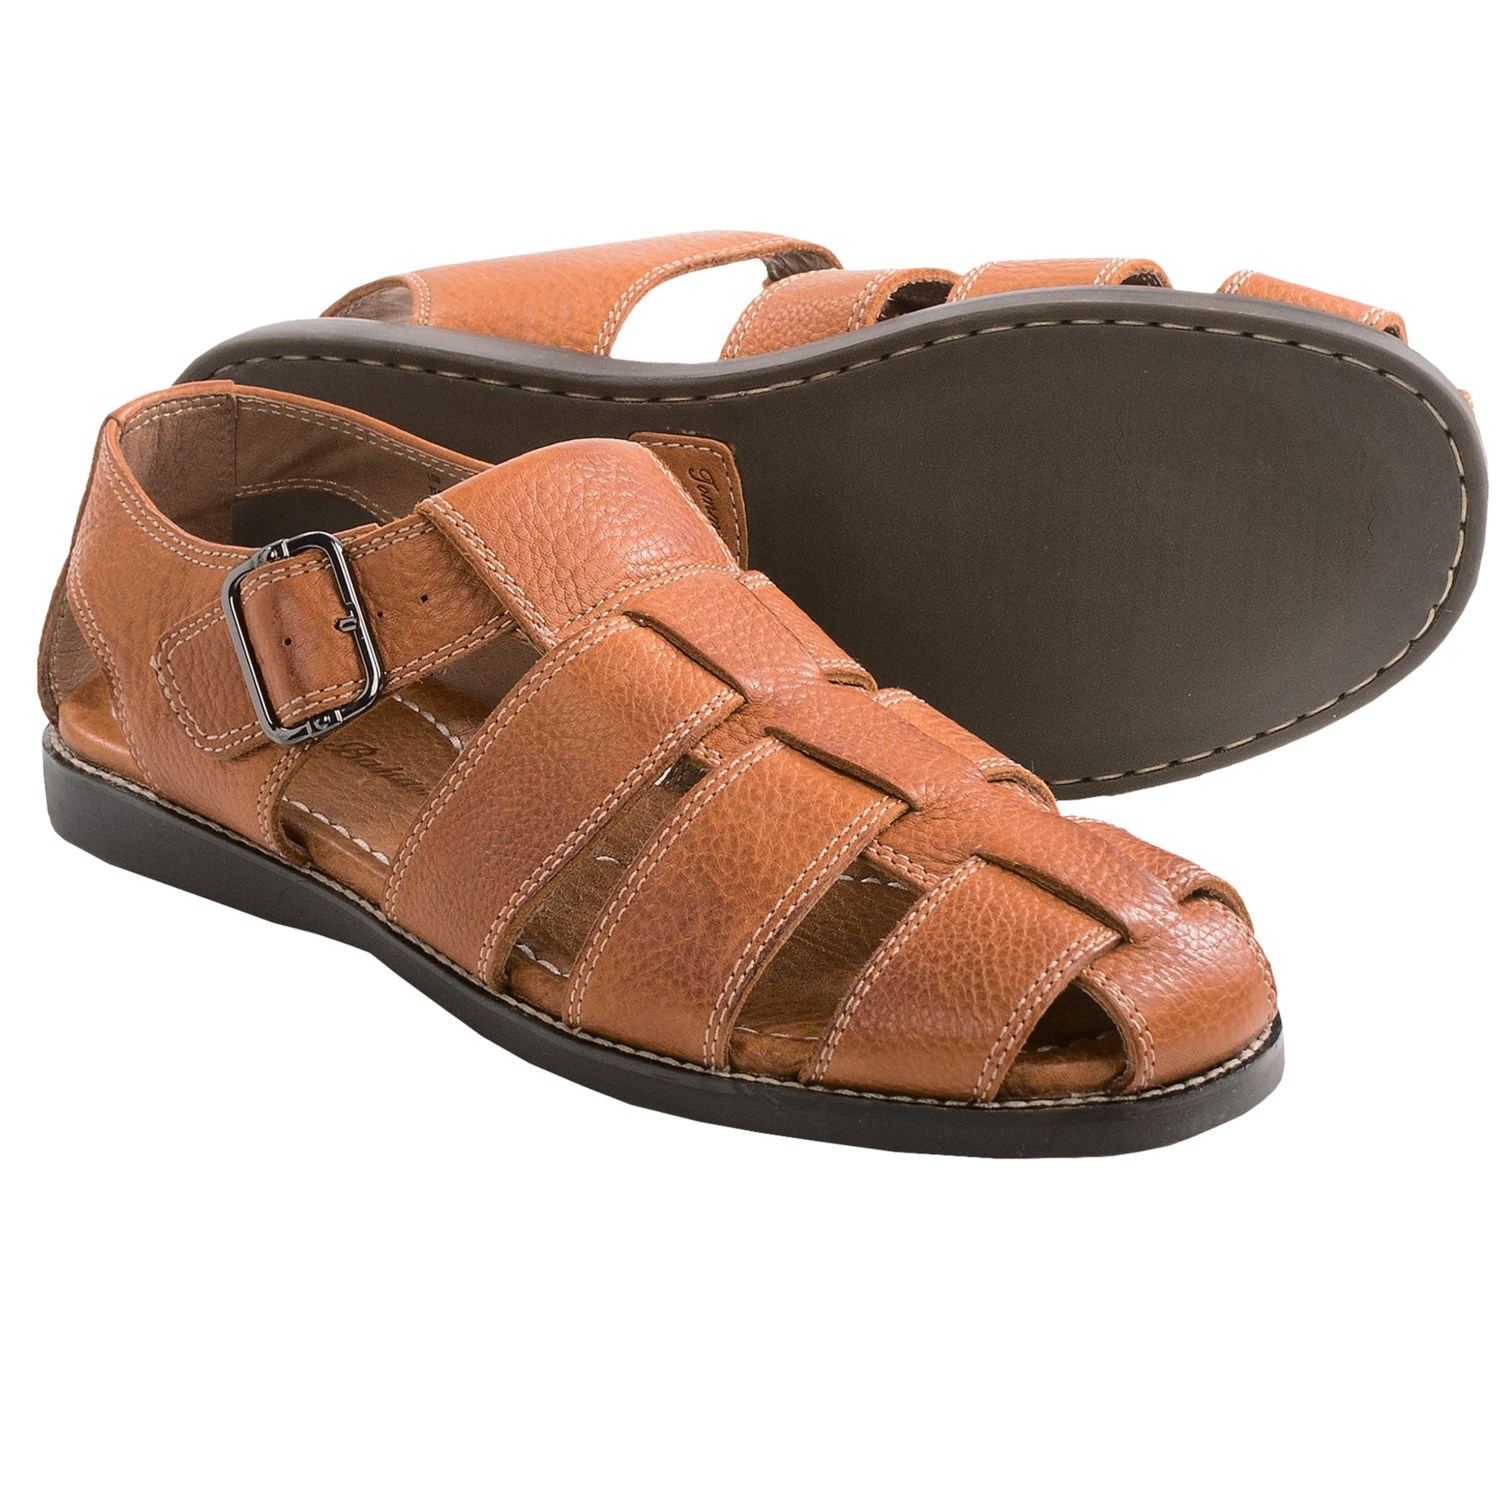 ... Bahama Anchors Away Fisherman Sandals - Leather (For Men) - Save 35%